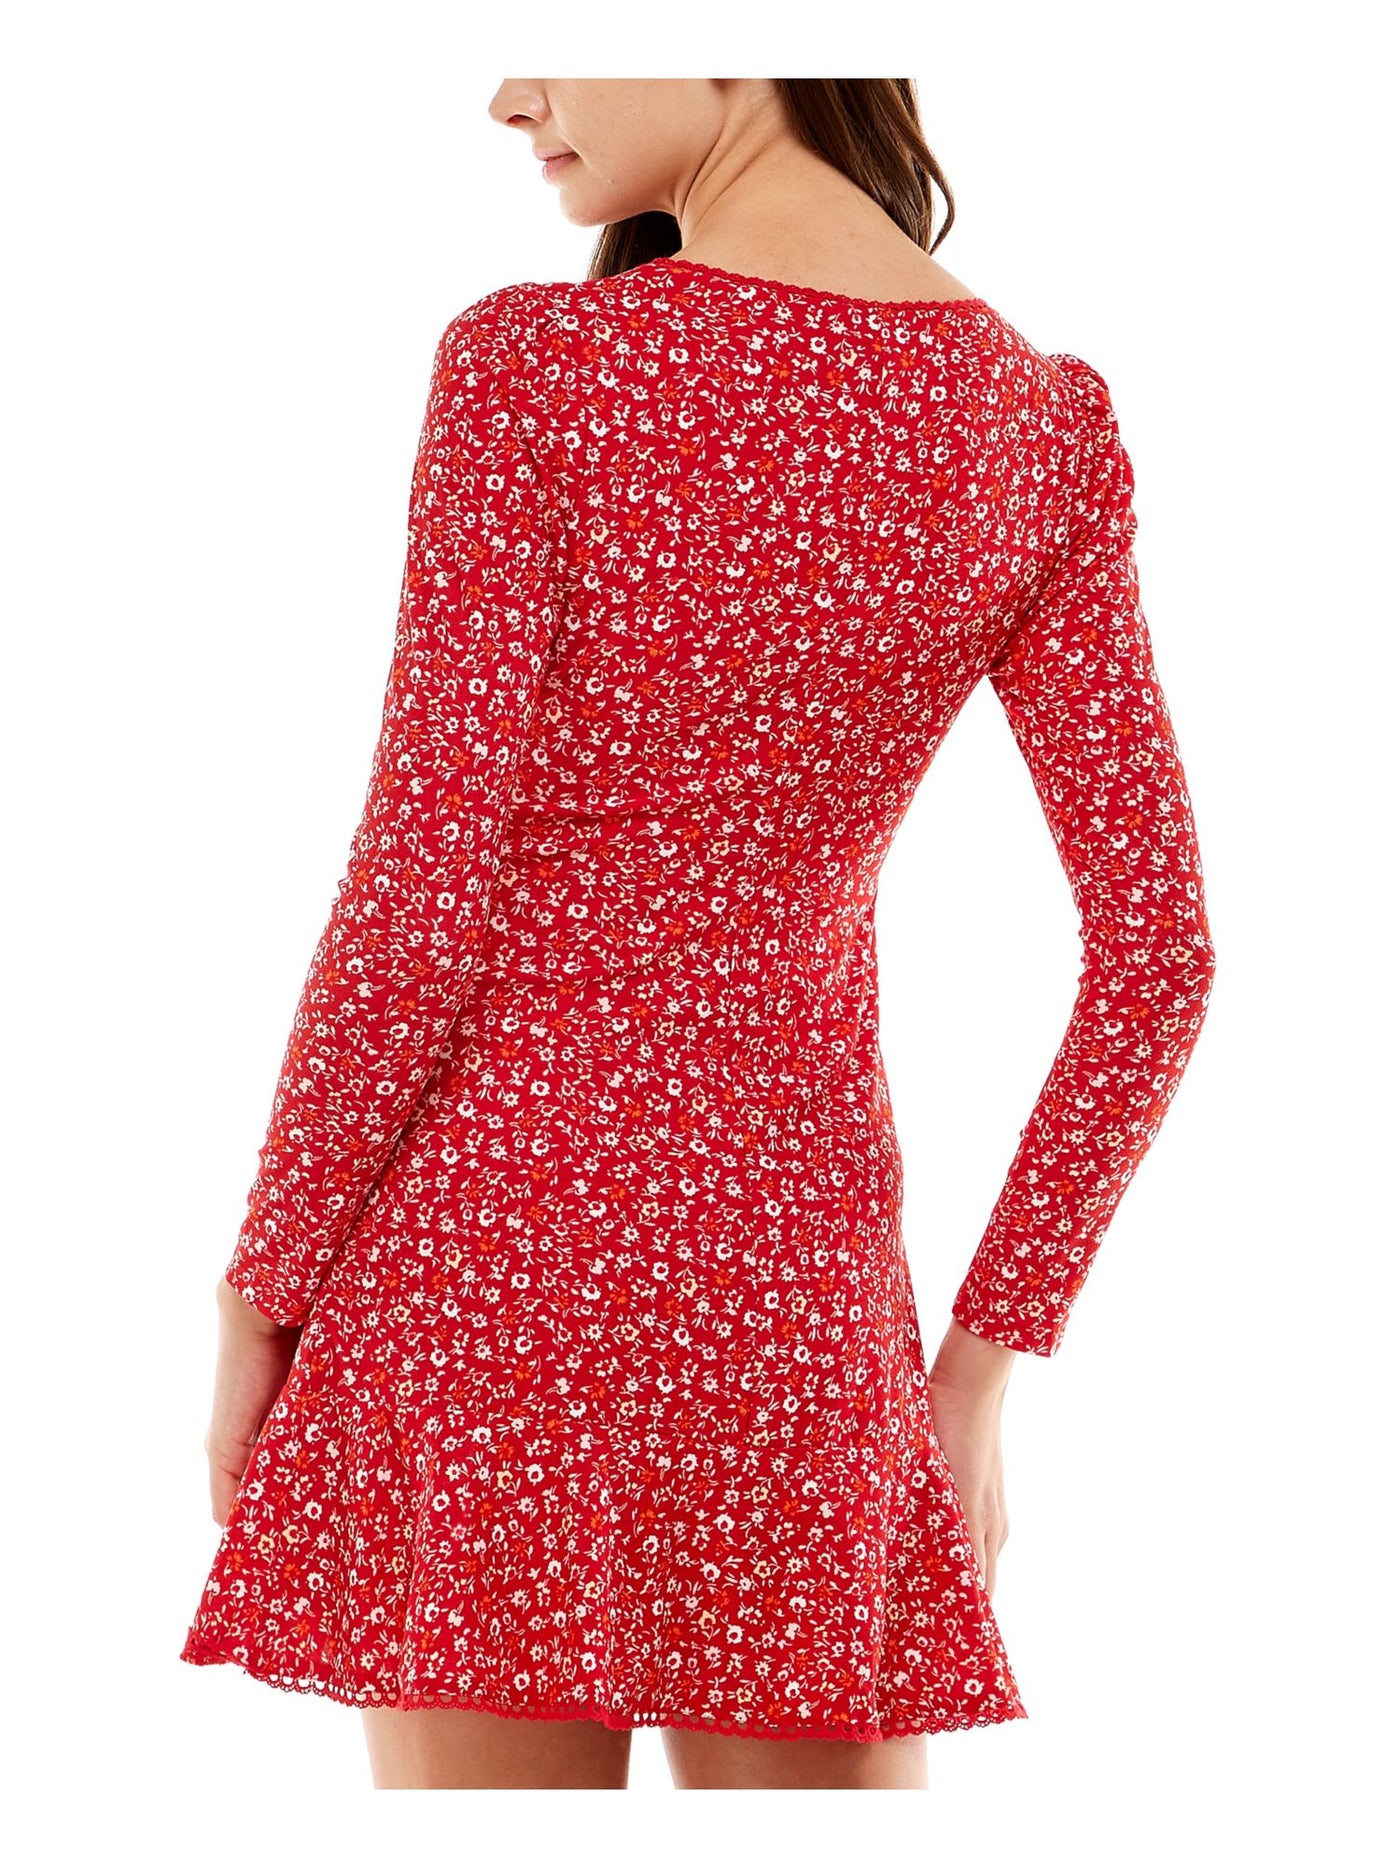 CITY STUDIO Womens Red Fitted Lined Lace Trim Floral Long Sleeve Surplice Neckline Mini Party Fit + Flare Dress Juniors XS